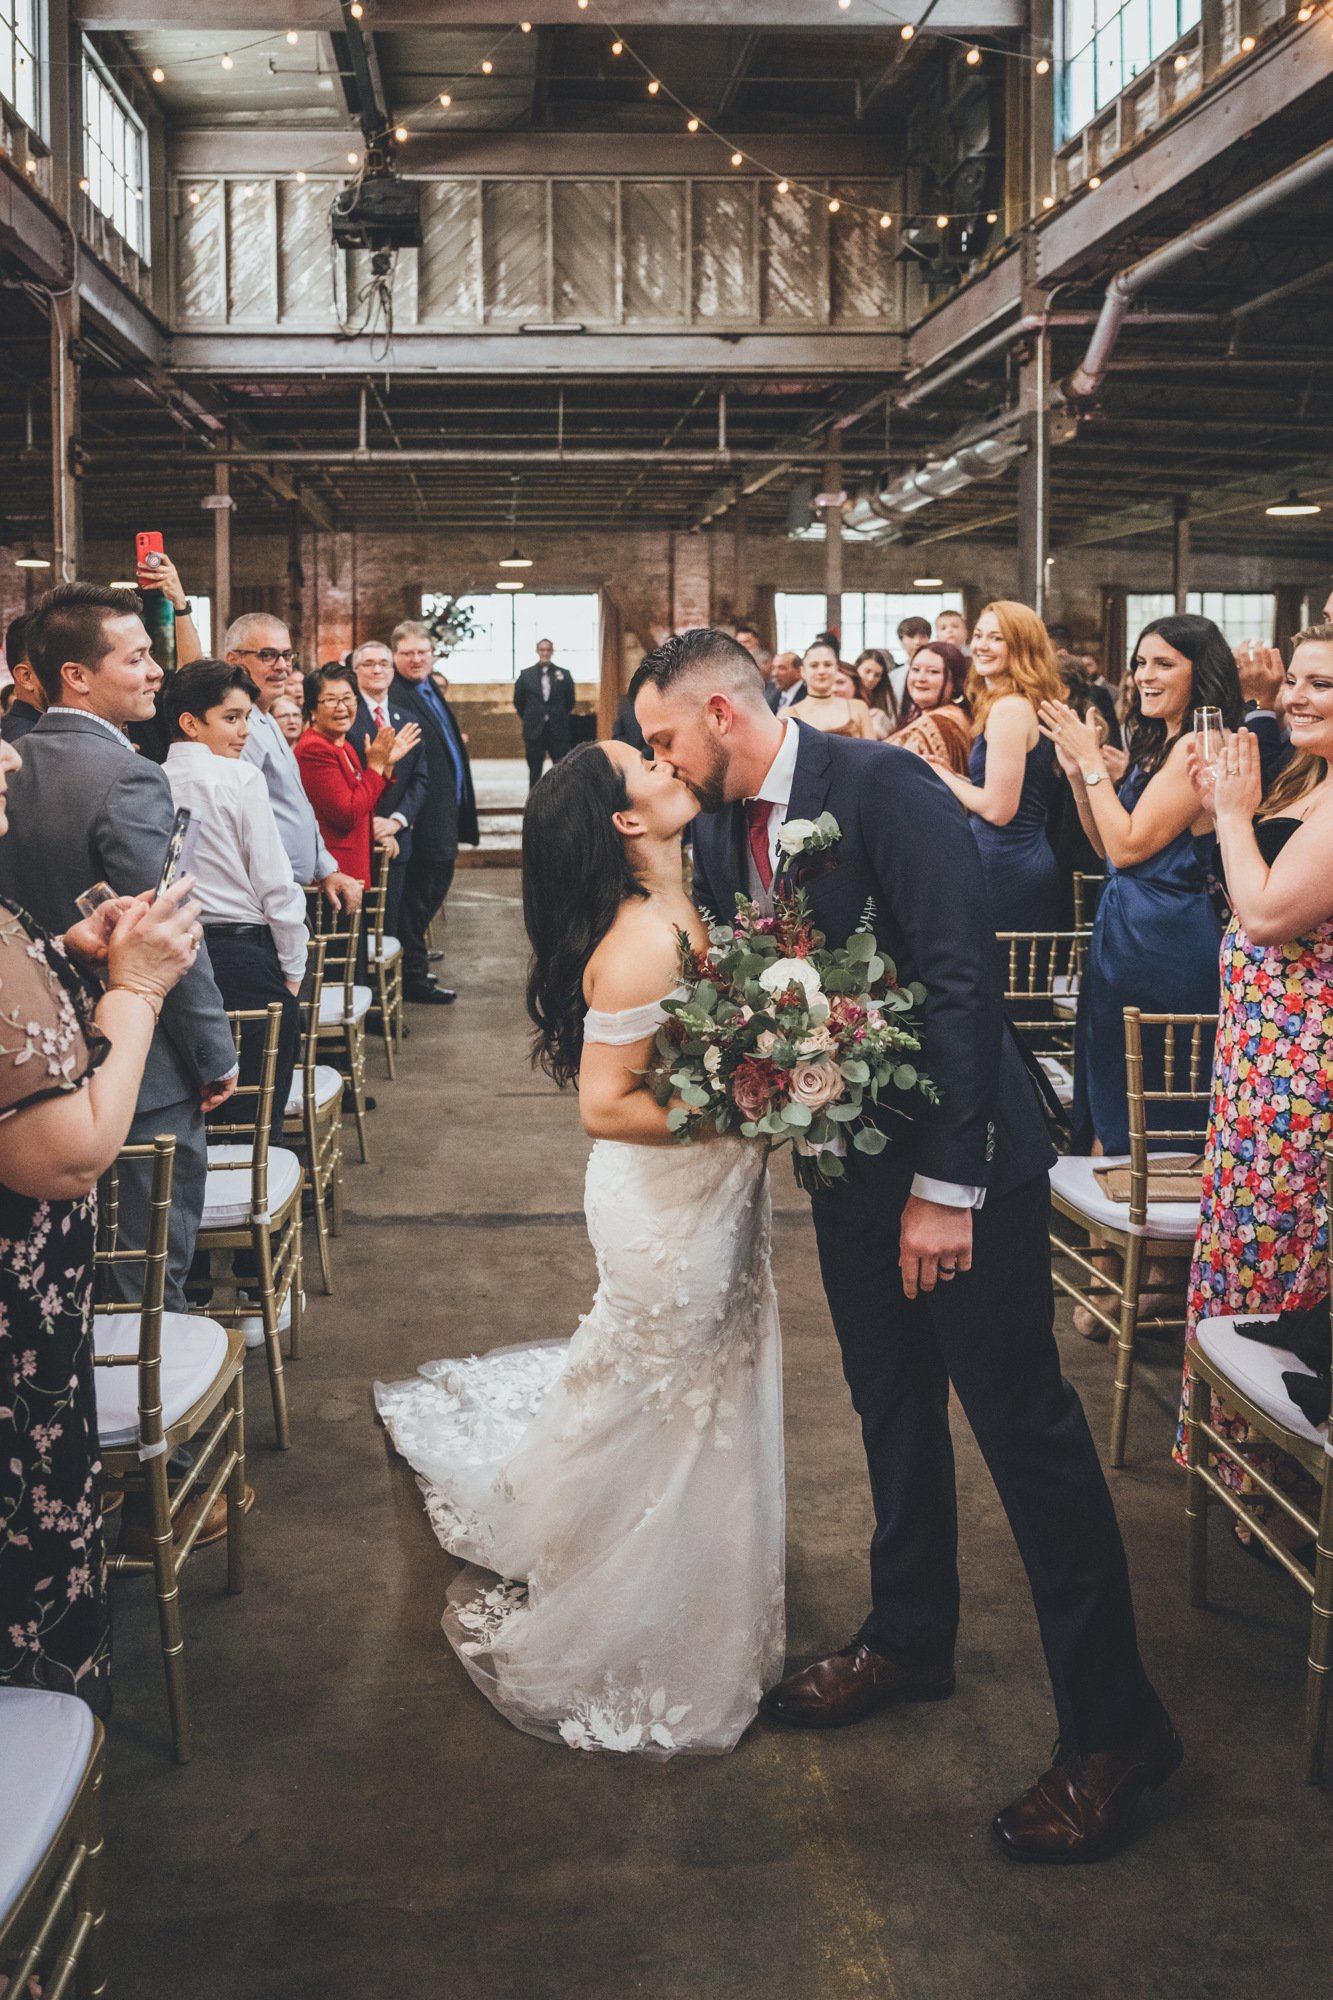 Second kiss as husband and wife following wedding ceremony at The Glass Factory in Jacksonville, Florida.jpg